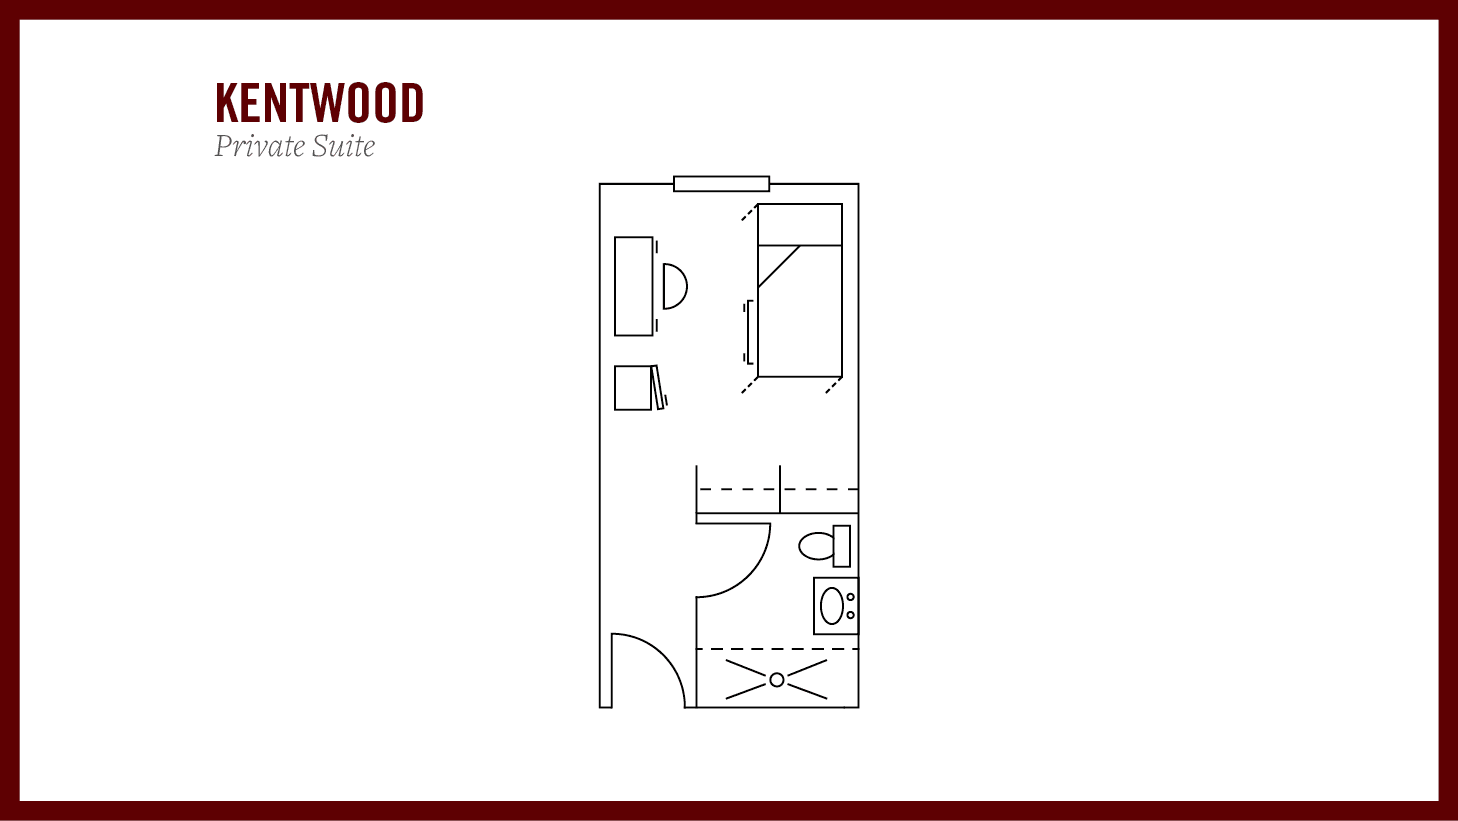 Kentwood - Private Suite